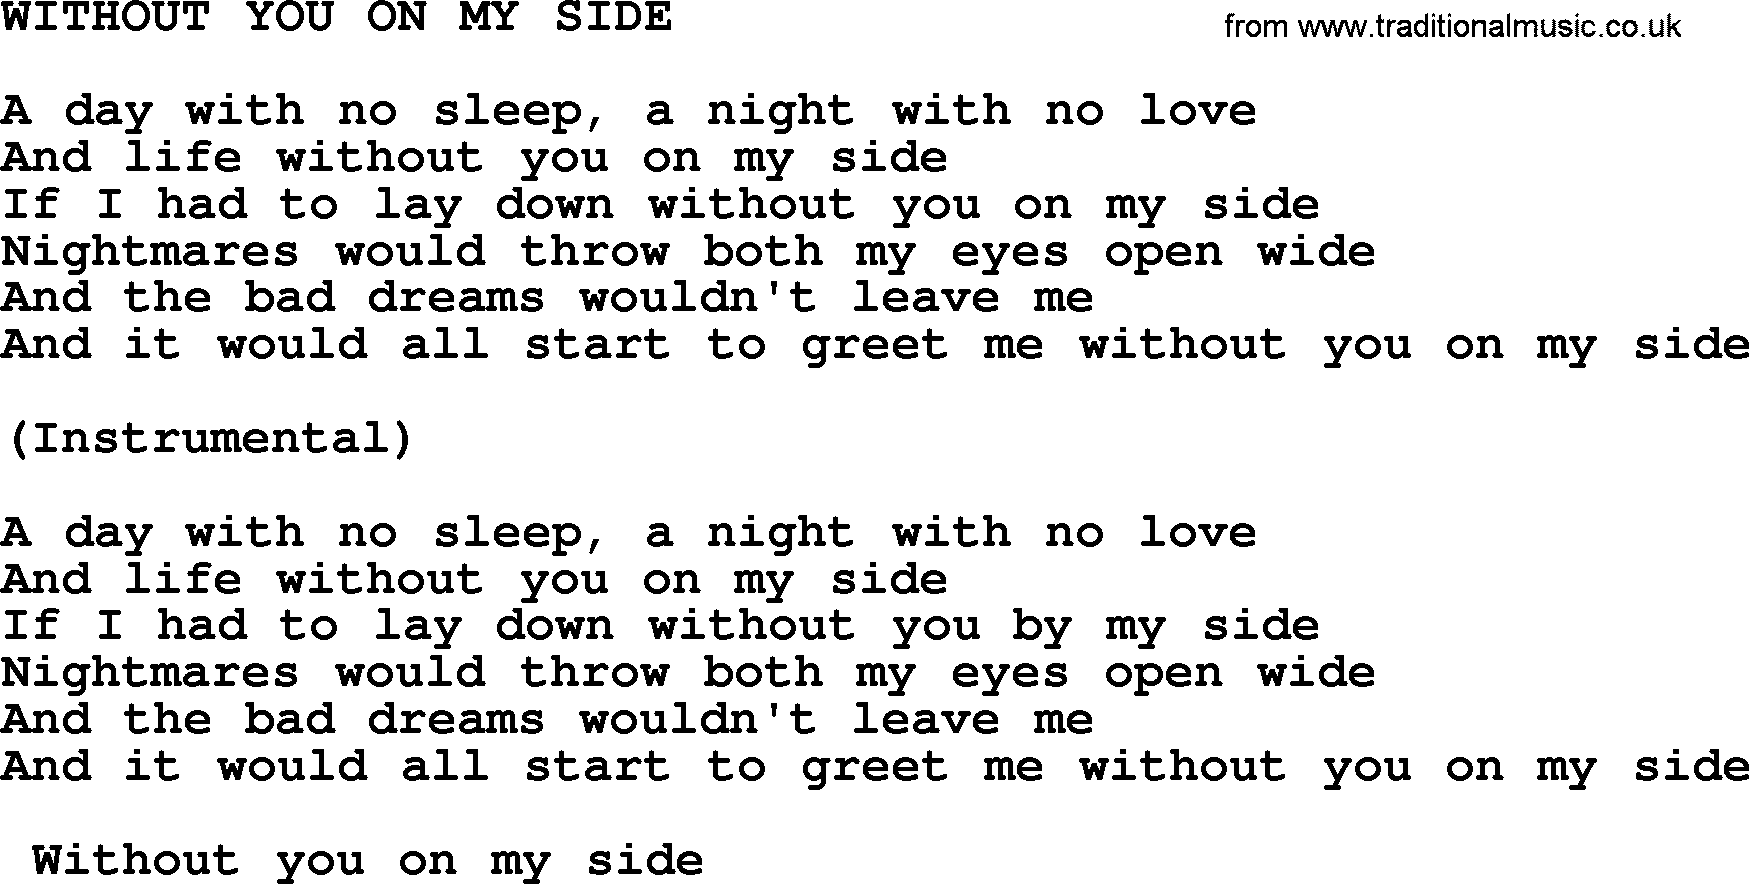 Merle Haggard song: Without You On My Side, lyrics.